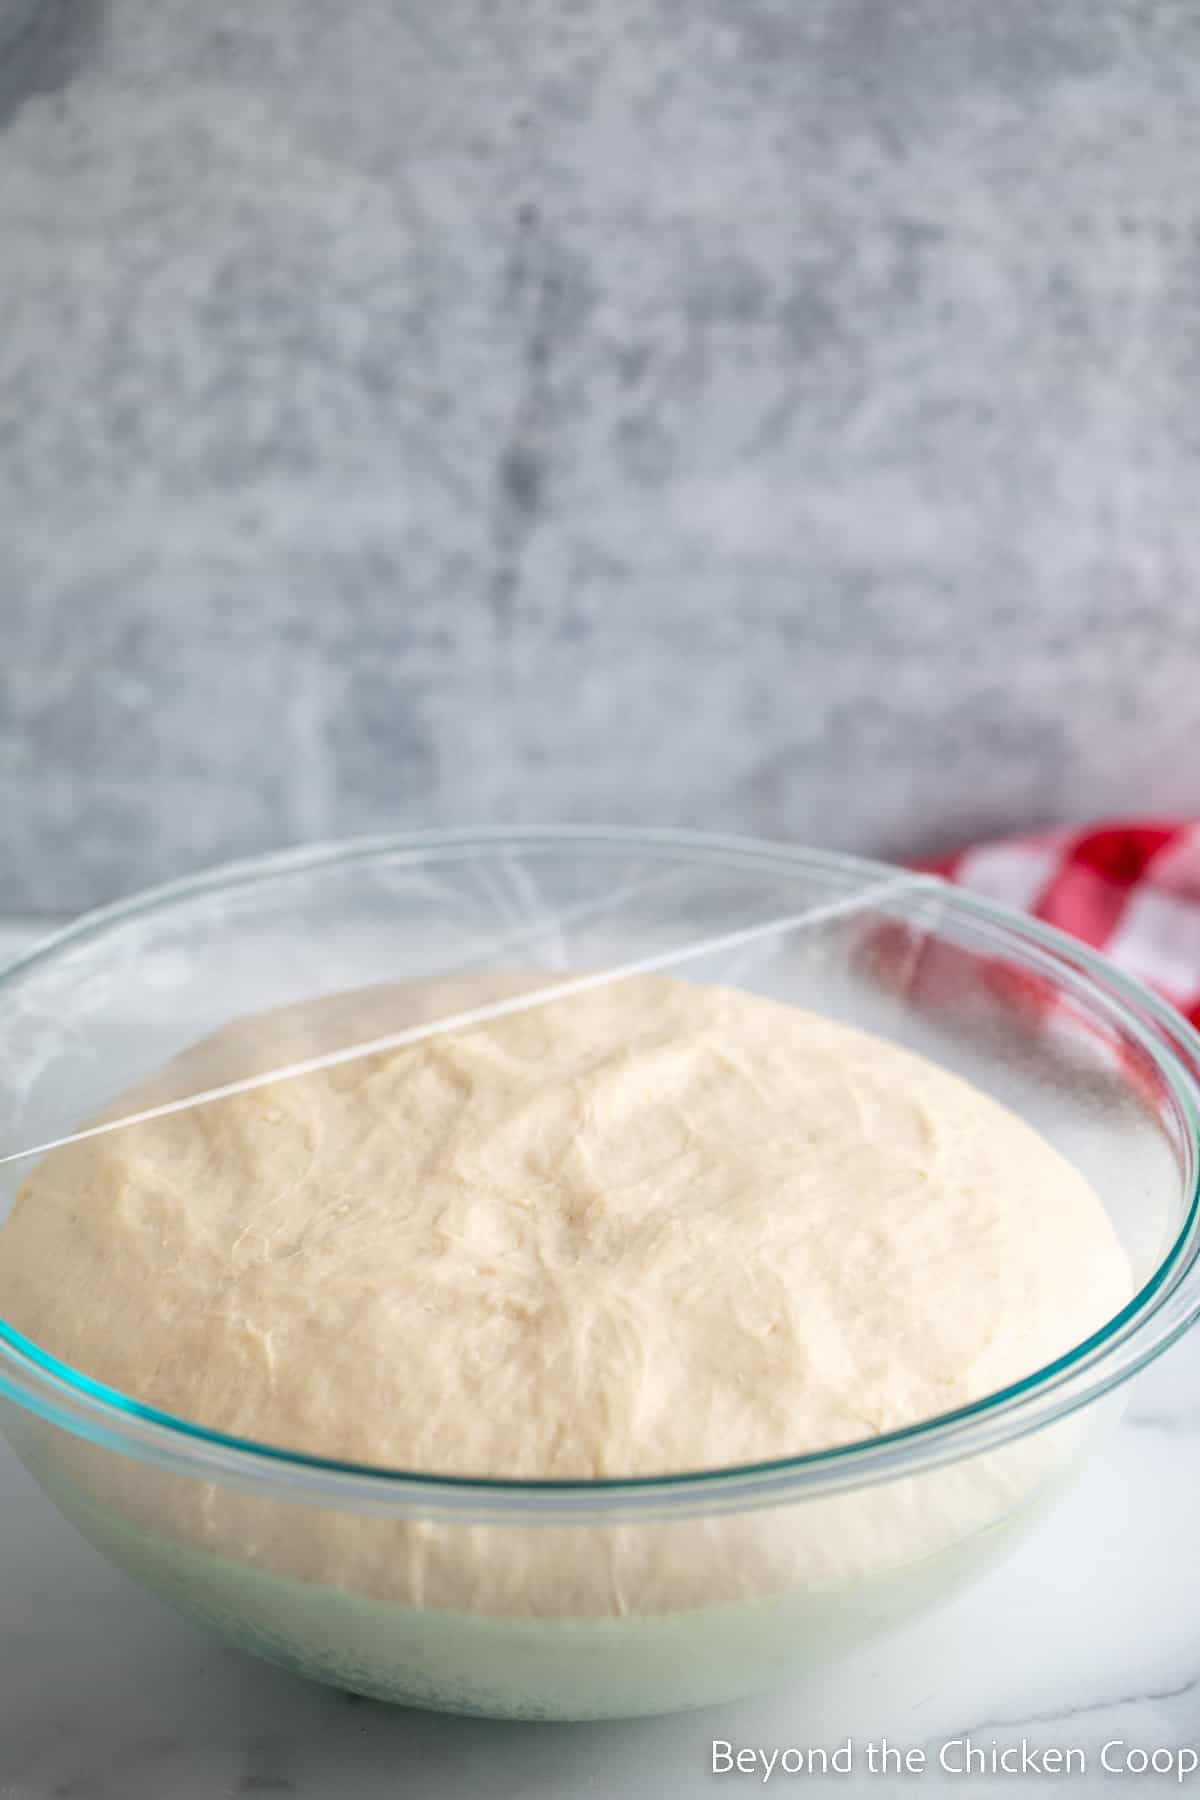 Bread dough that has fully doubled in size.